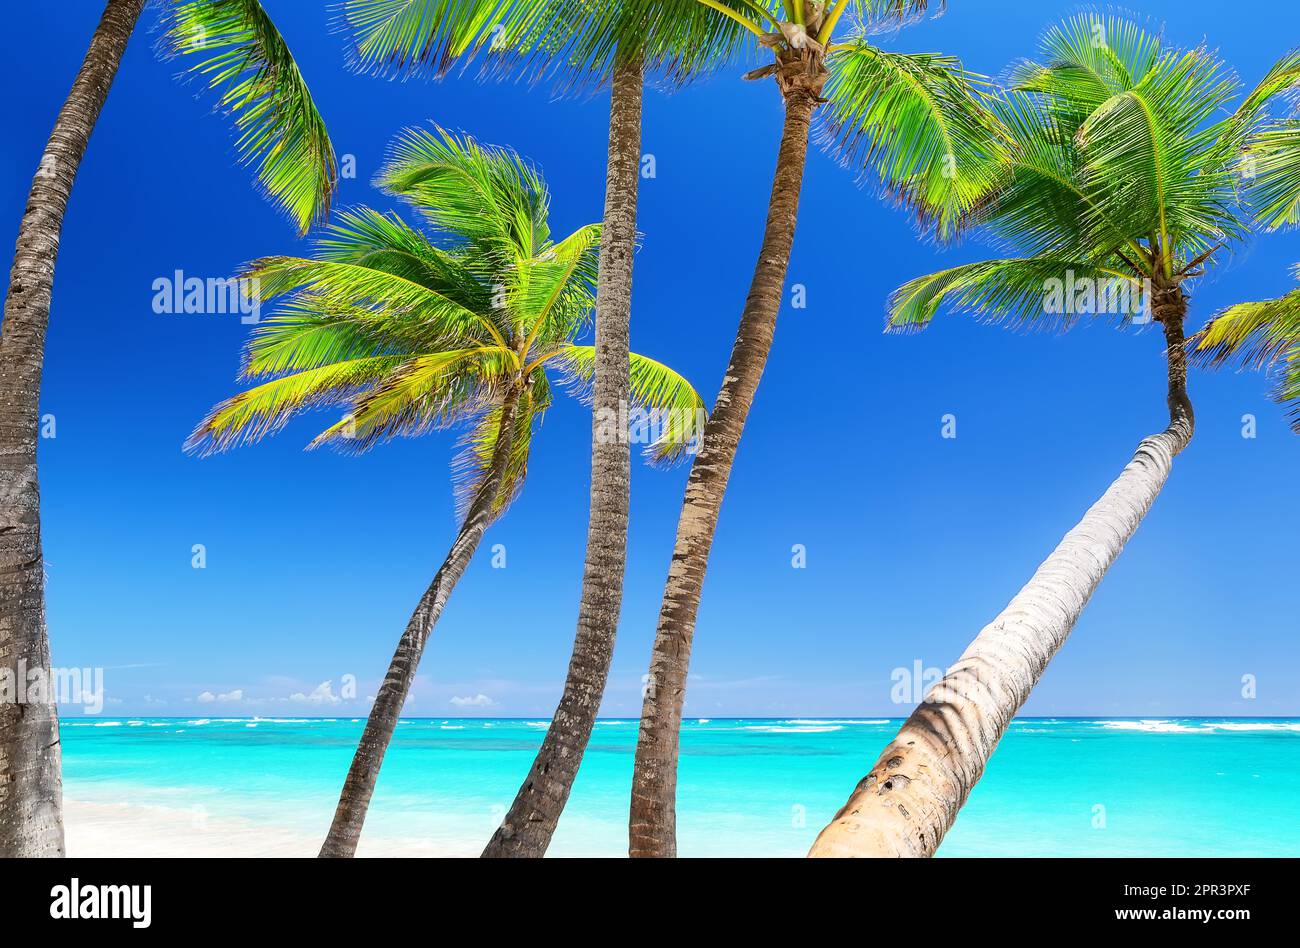 Tropical white sand beach with coconut palm trees and turquoise blue water in Punta Cana, Dominican Republic. Summer holidays background. Sunny tropic Stock Photo